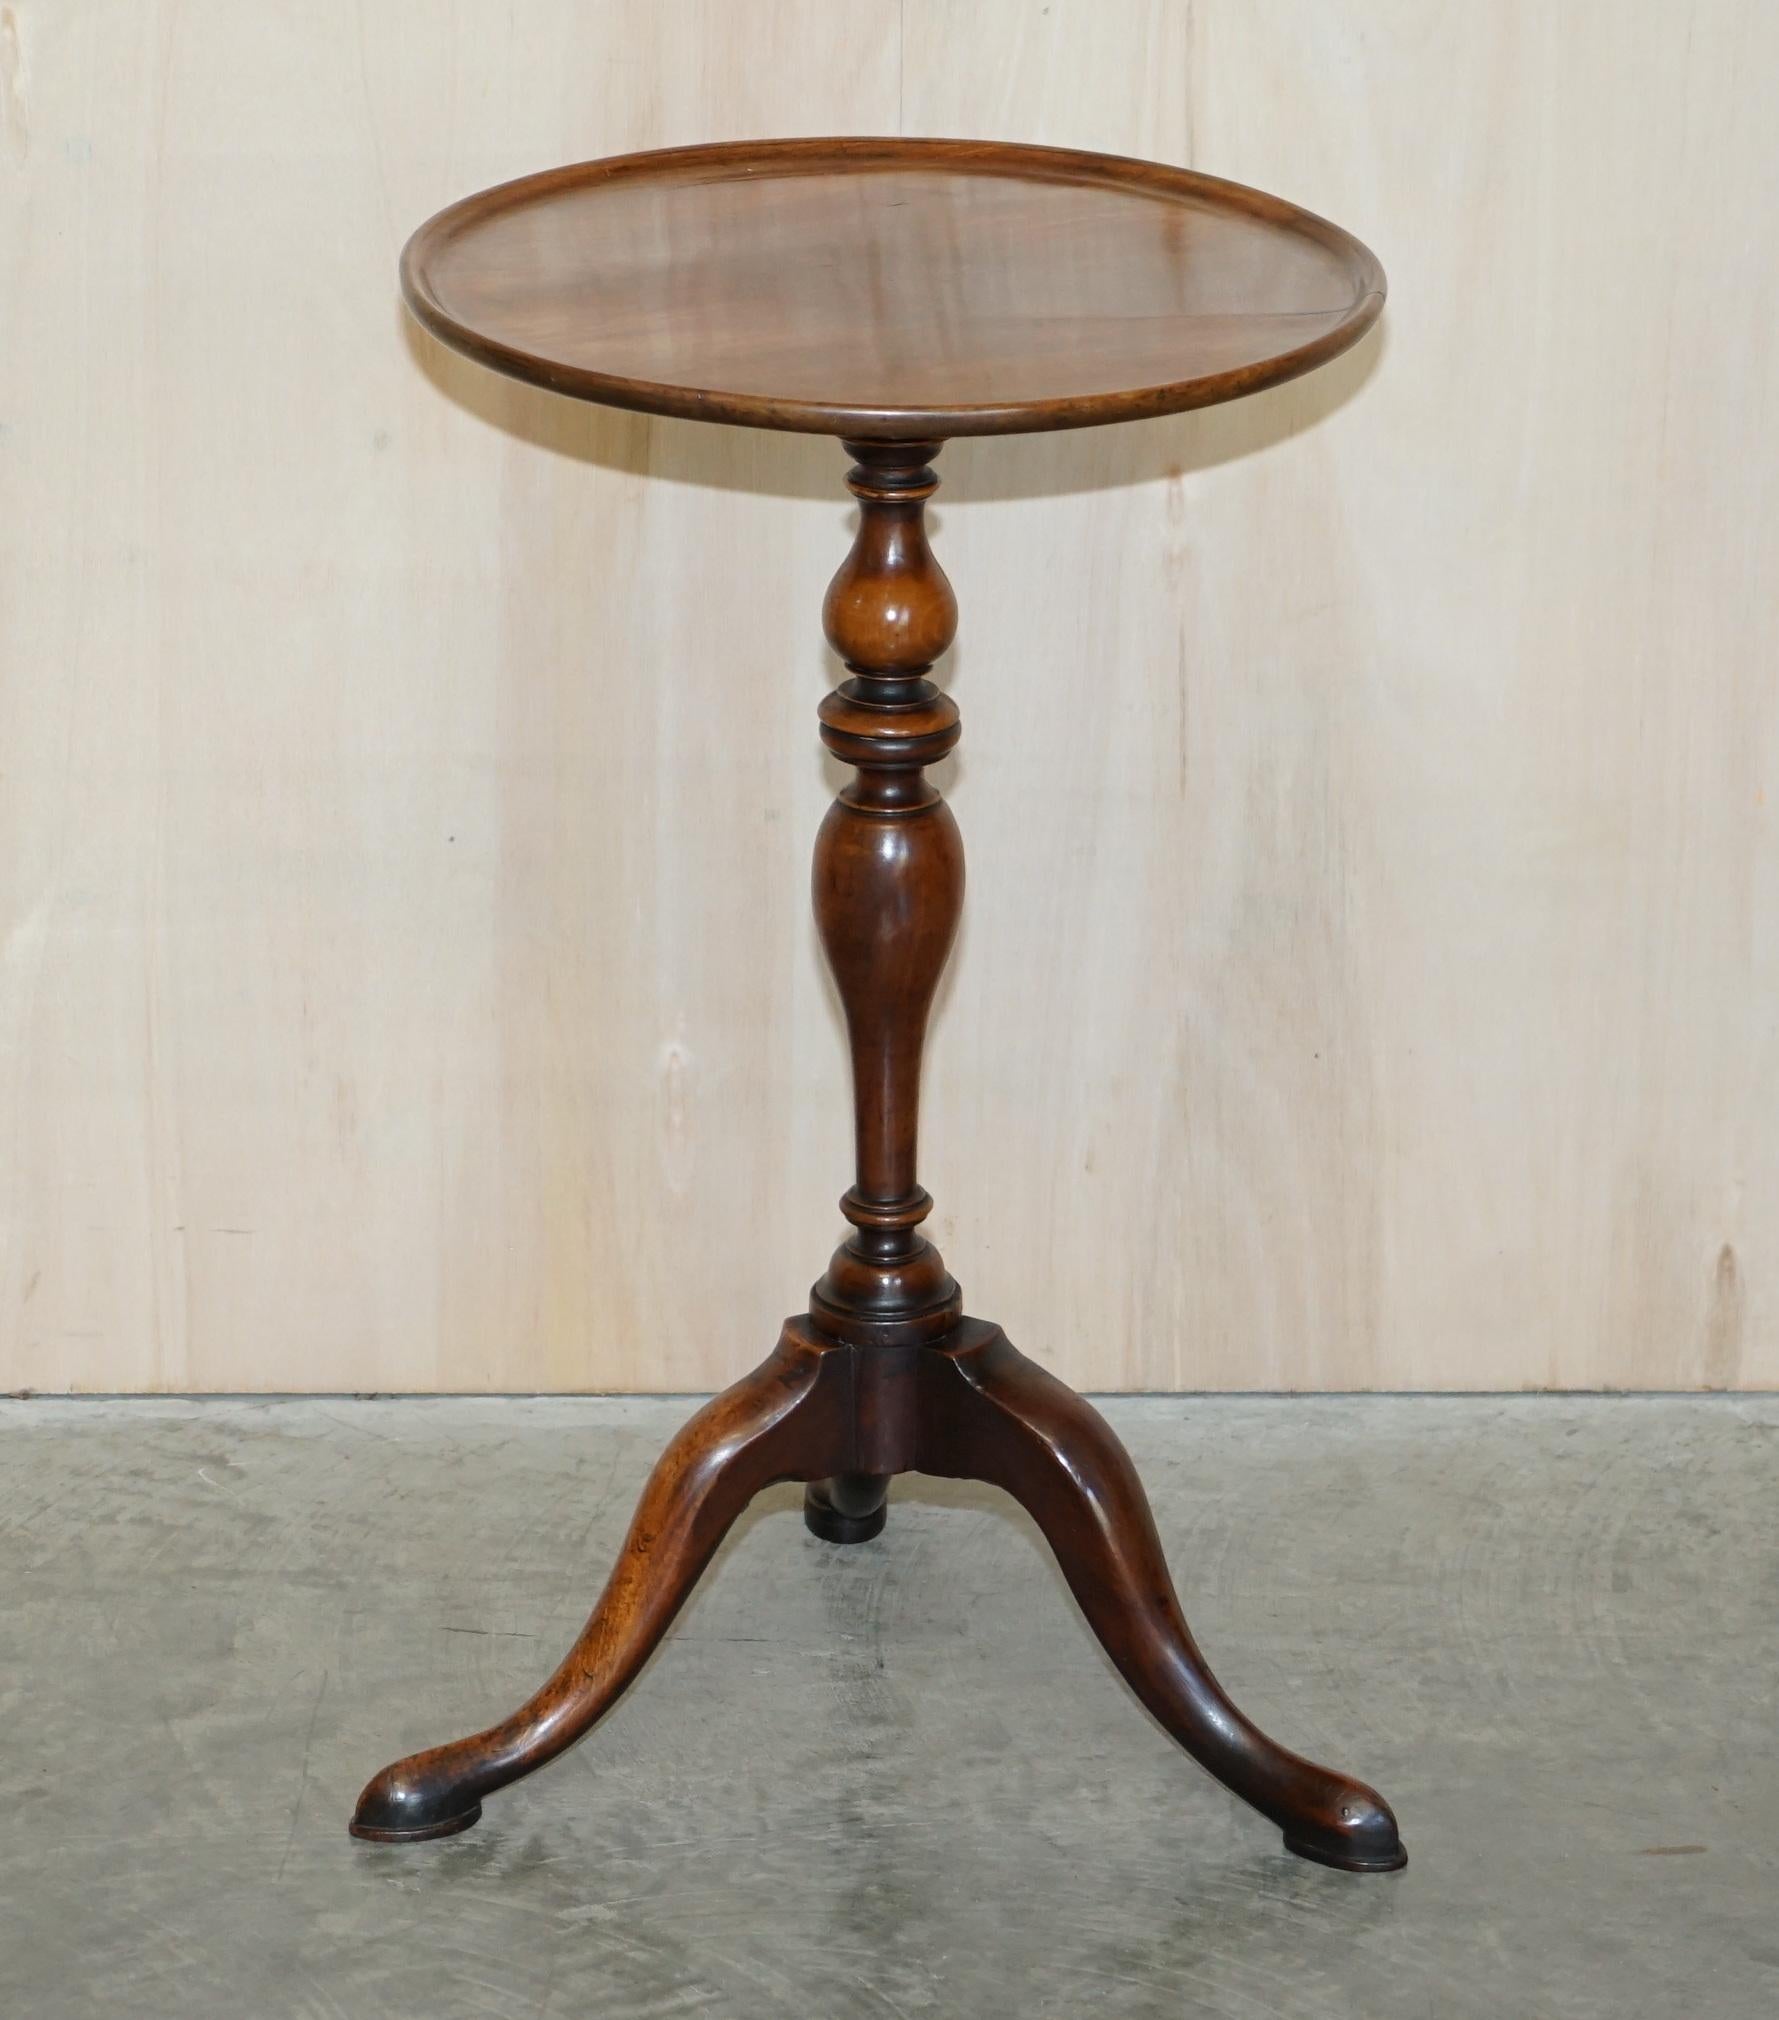 We are delighted to offer this lovely George IV circa 1820 mahogany tripod table

A glorious side table, a timeless design, the lines of this piece are so elegant

The base has metal strap supports, I'm not sure if they are original or a later